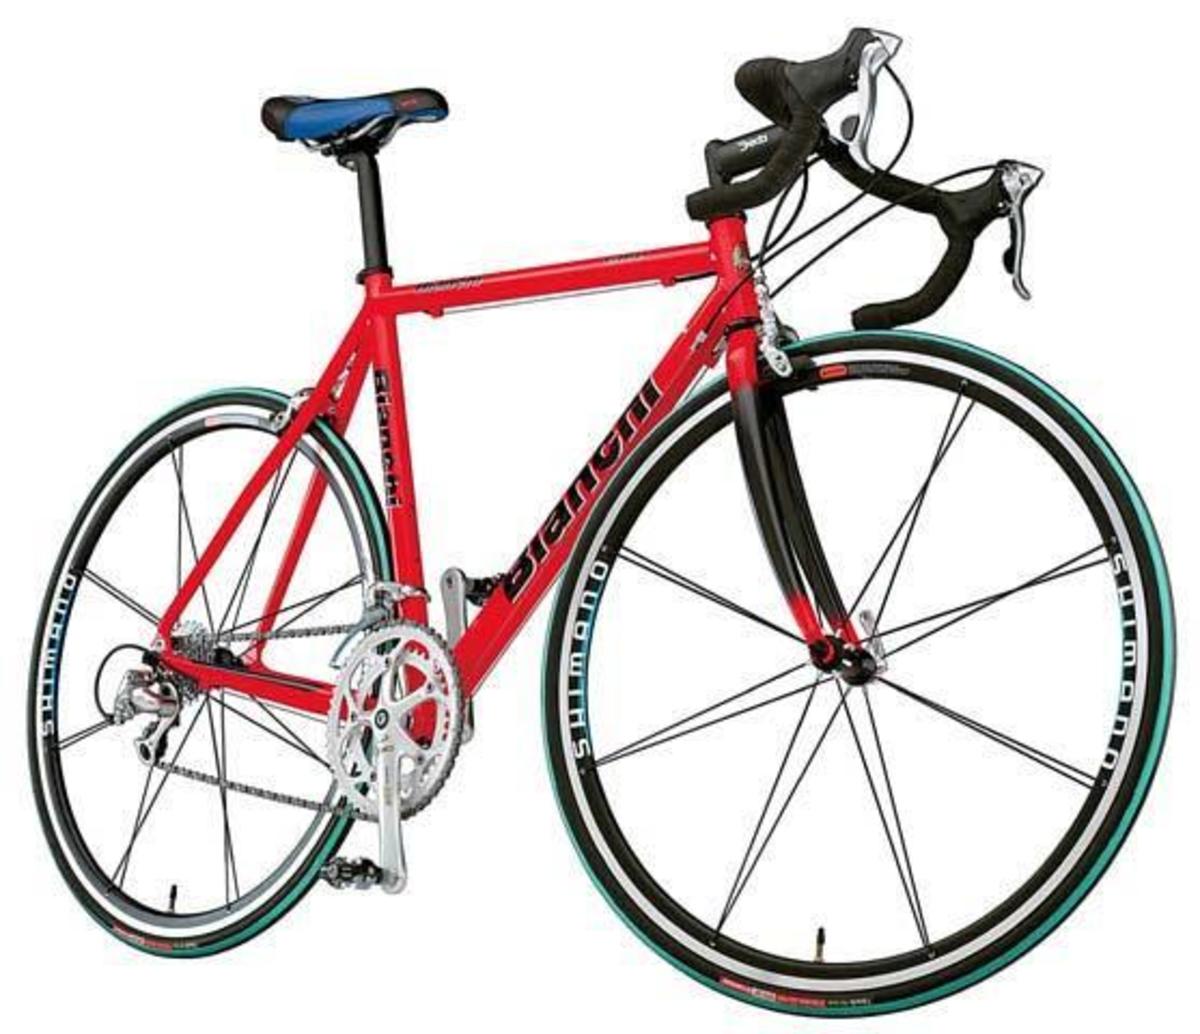 I purchased a model similar to this road bike. It was my first road bike purchase in some time.